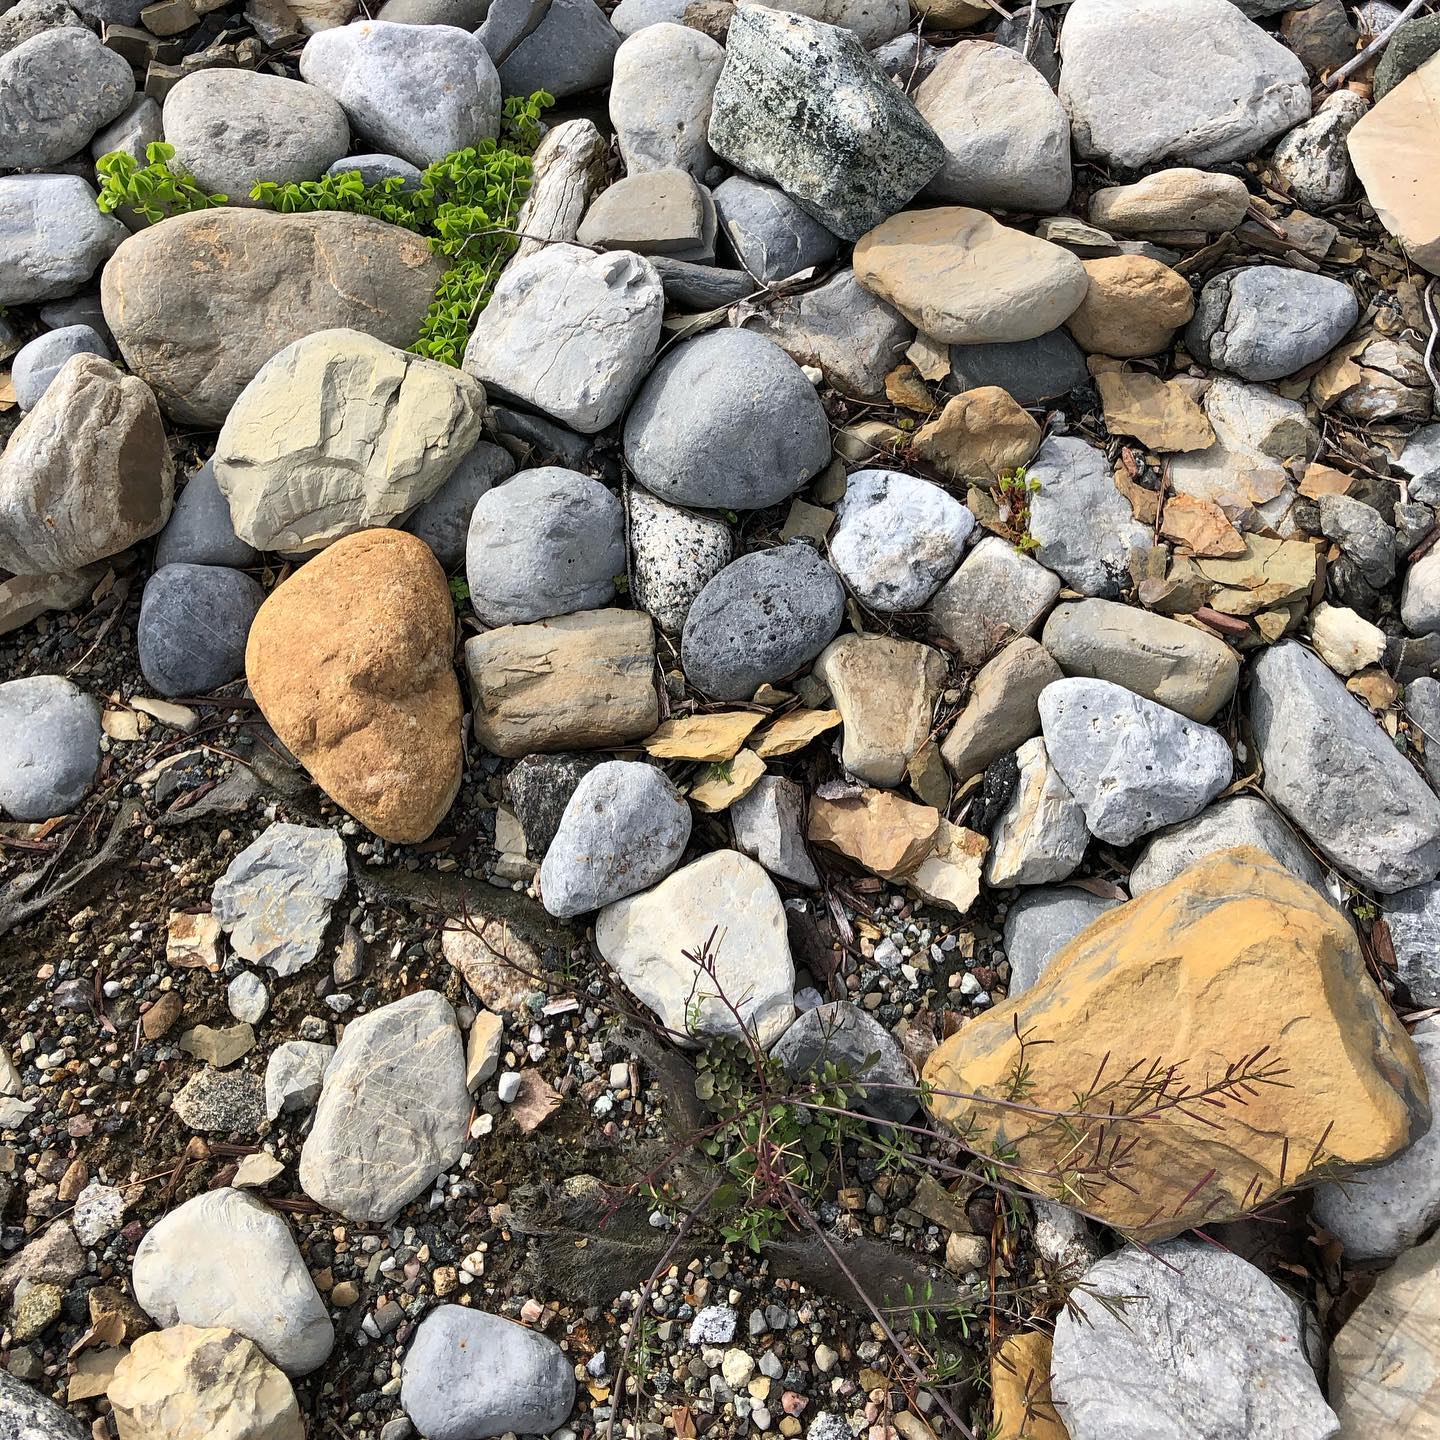 small rocks with weeds laying in the dirt